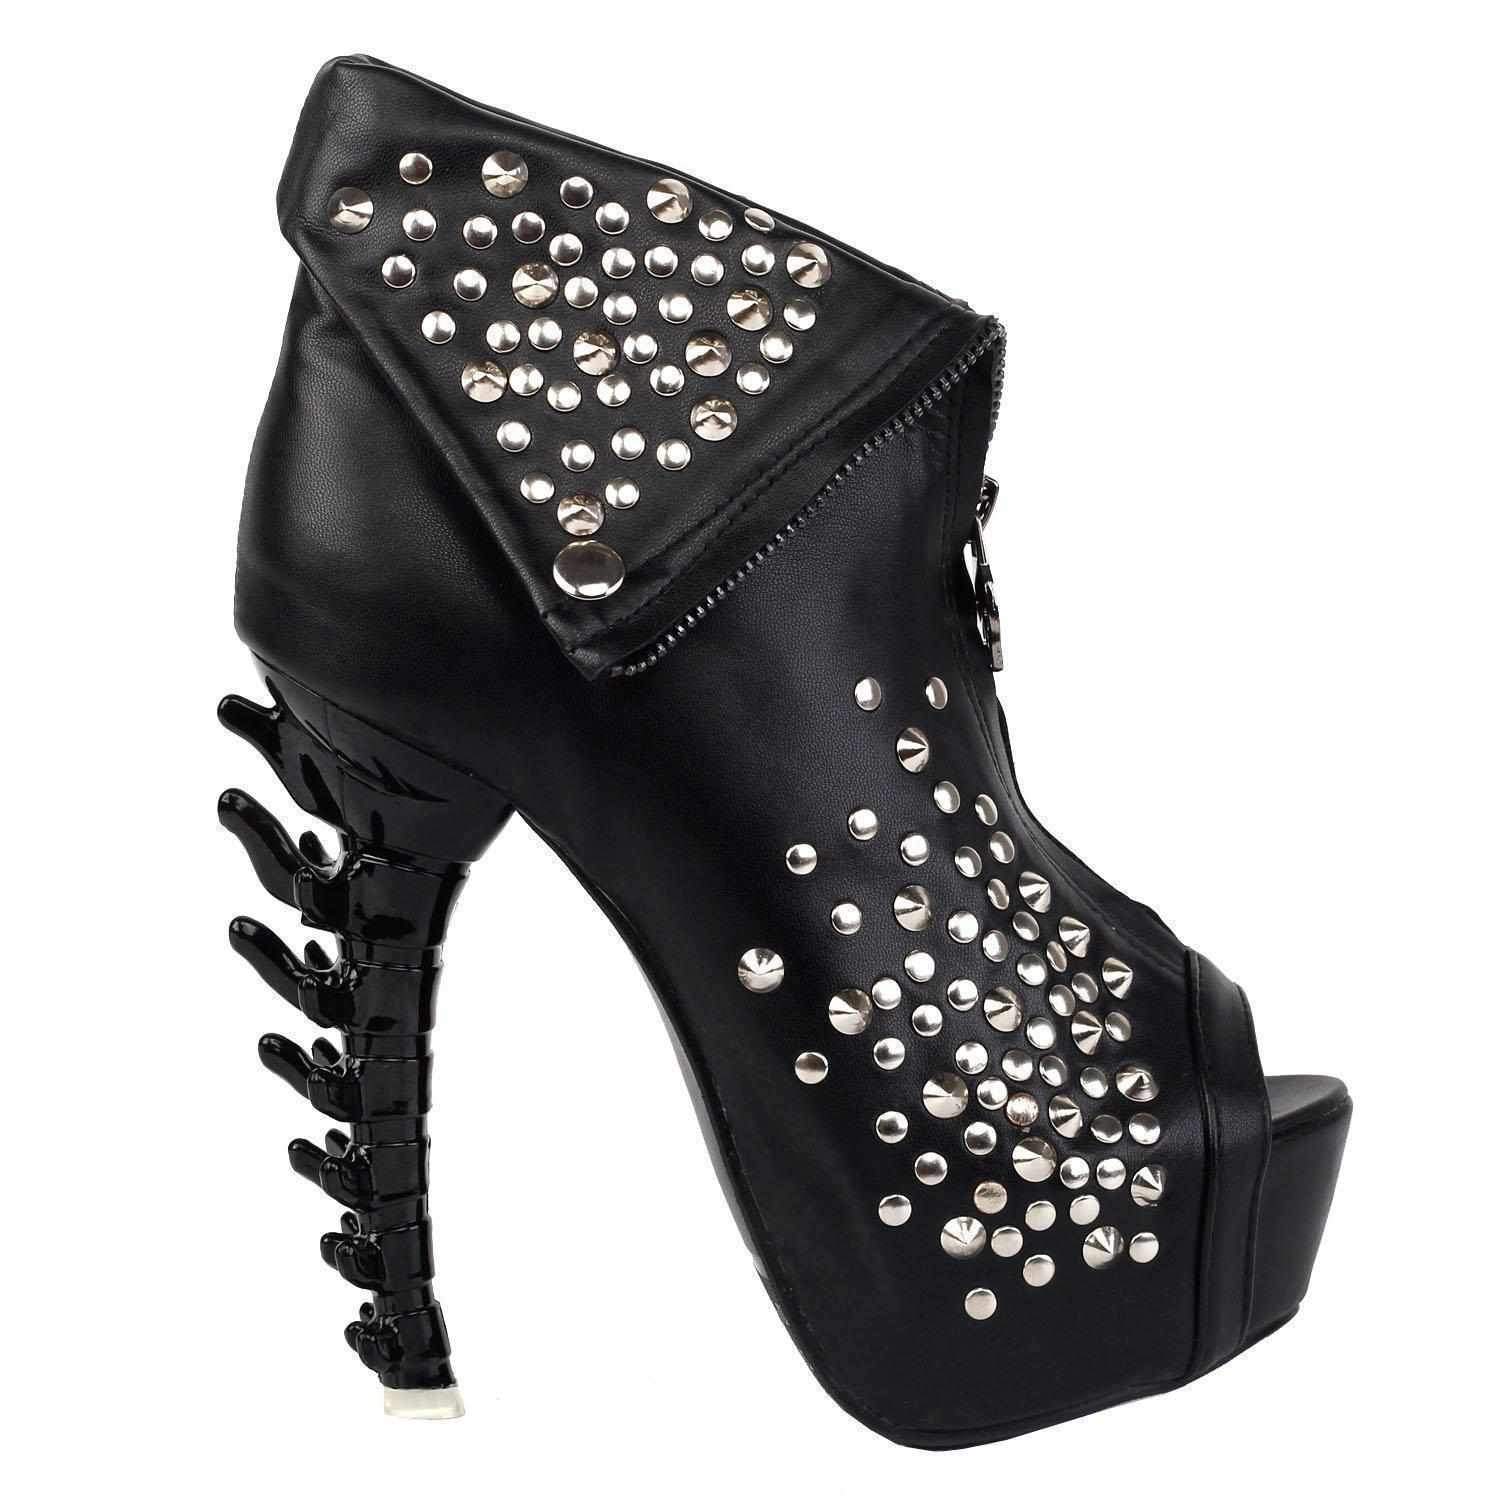 edgy black ankle boots